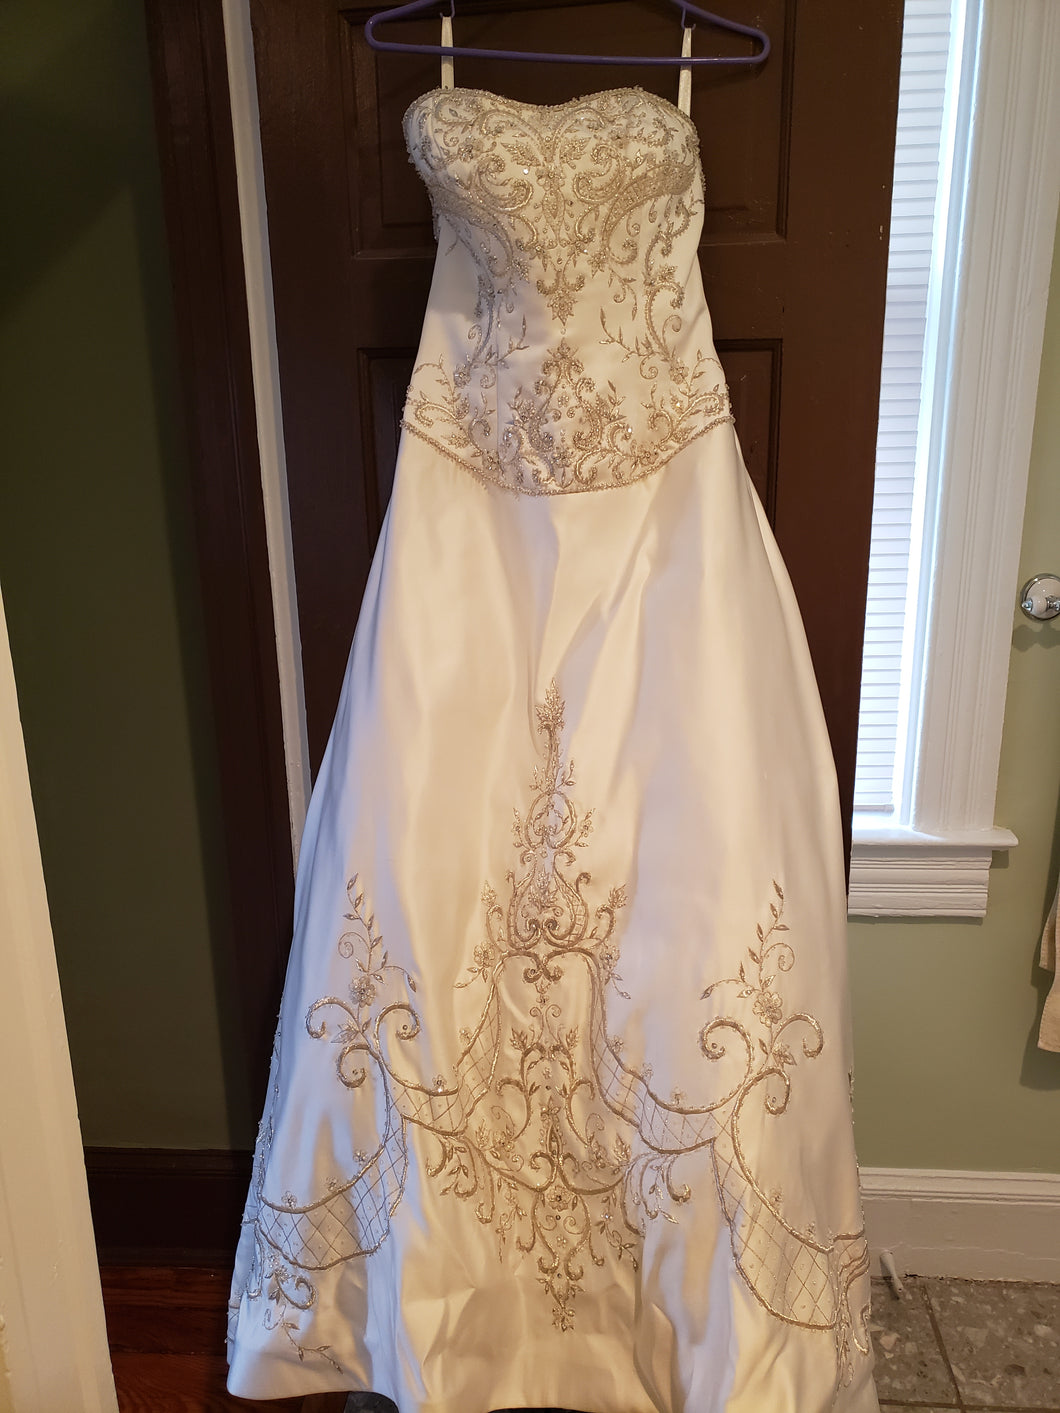 P2 '39' size 10 used wedding dress front view on hanger